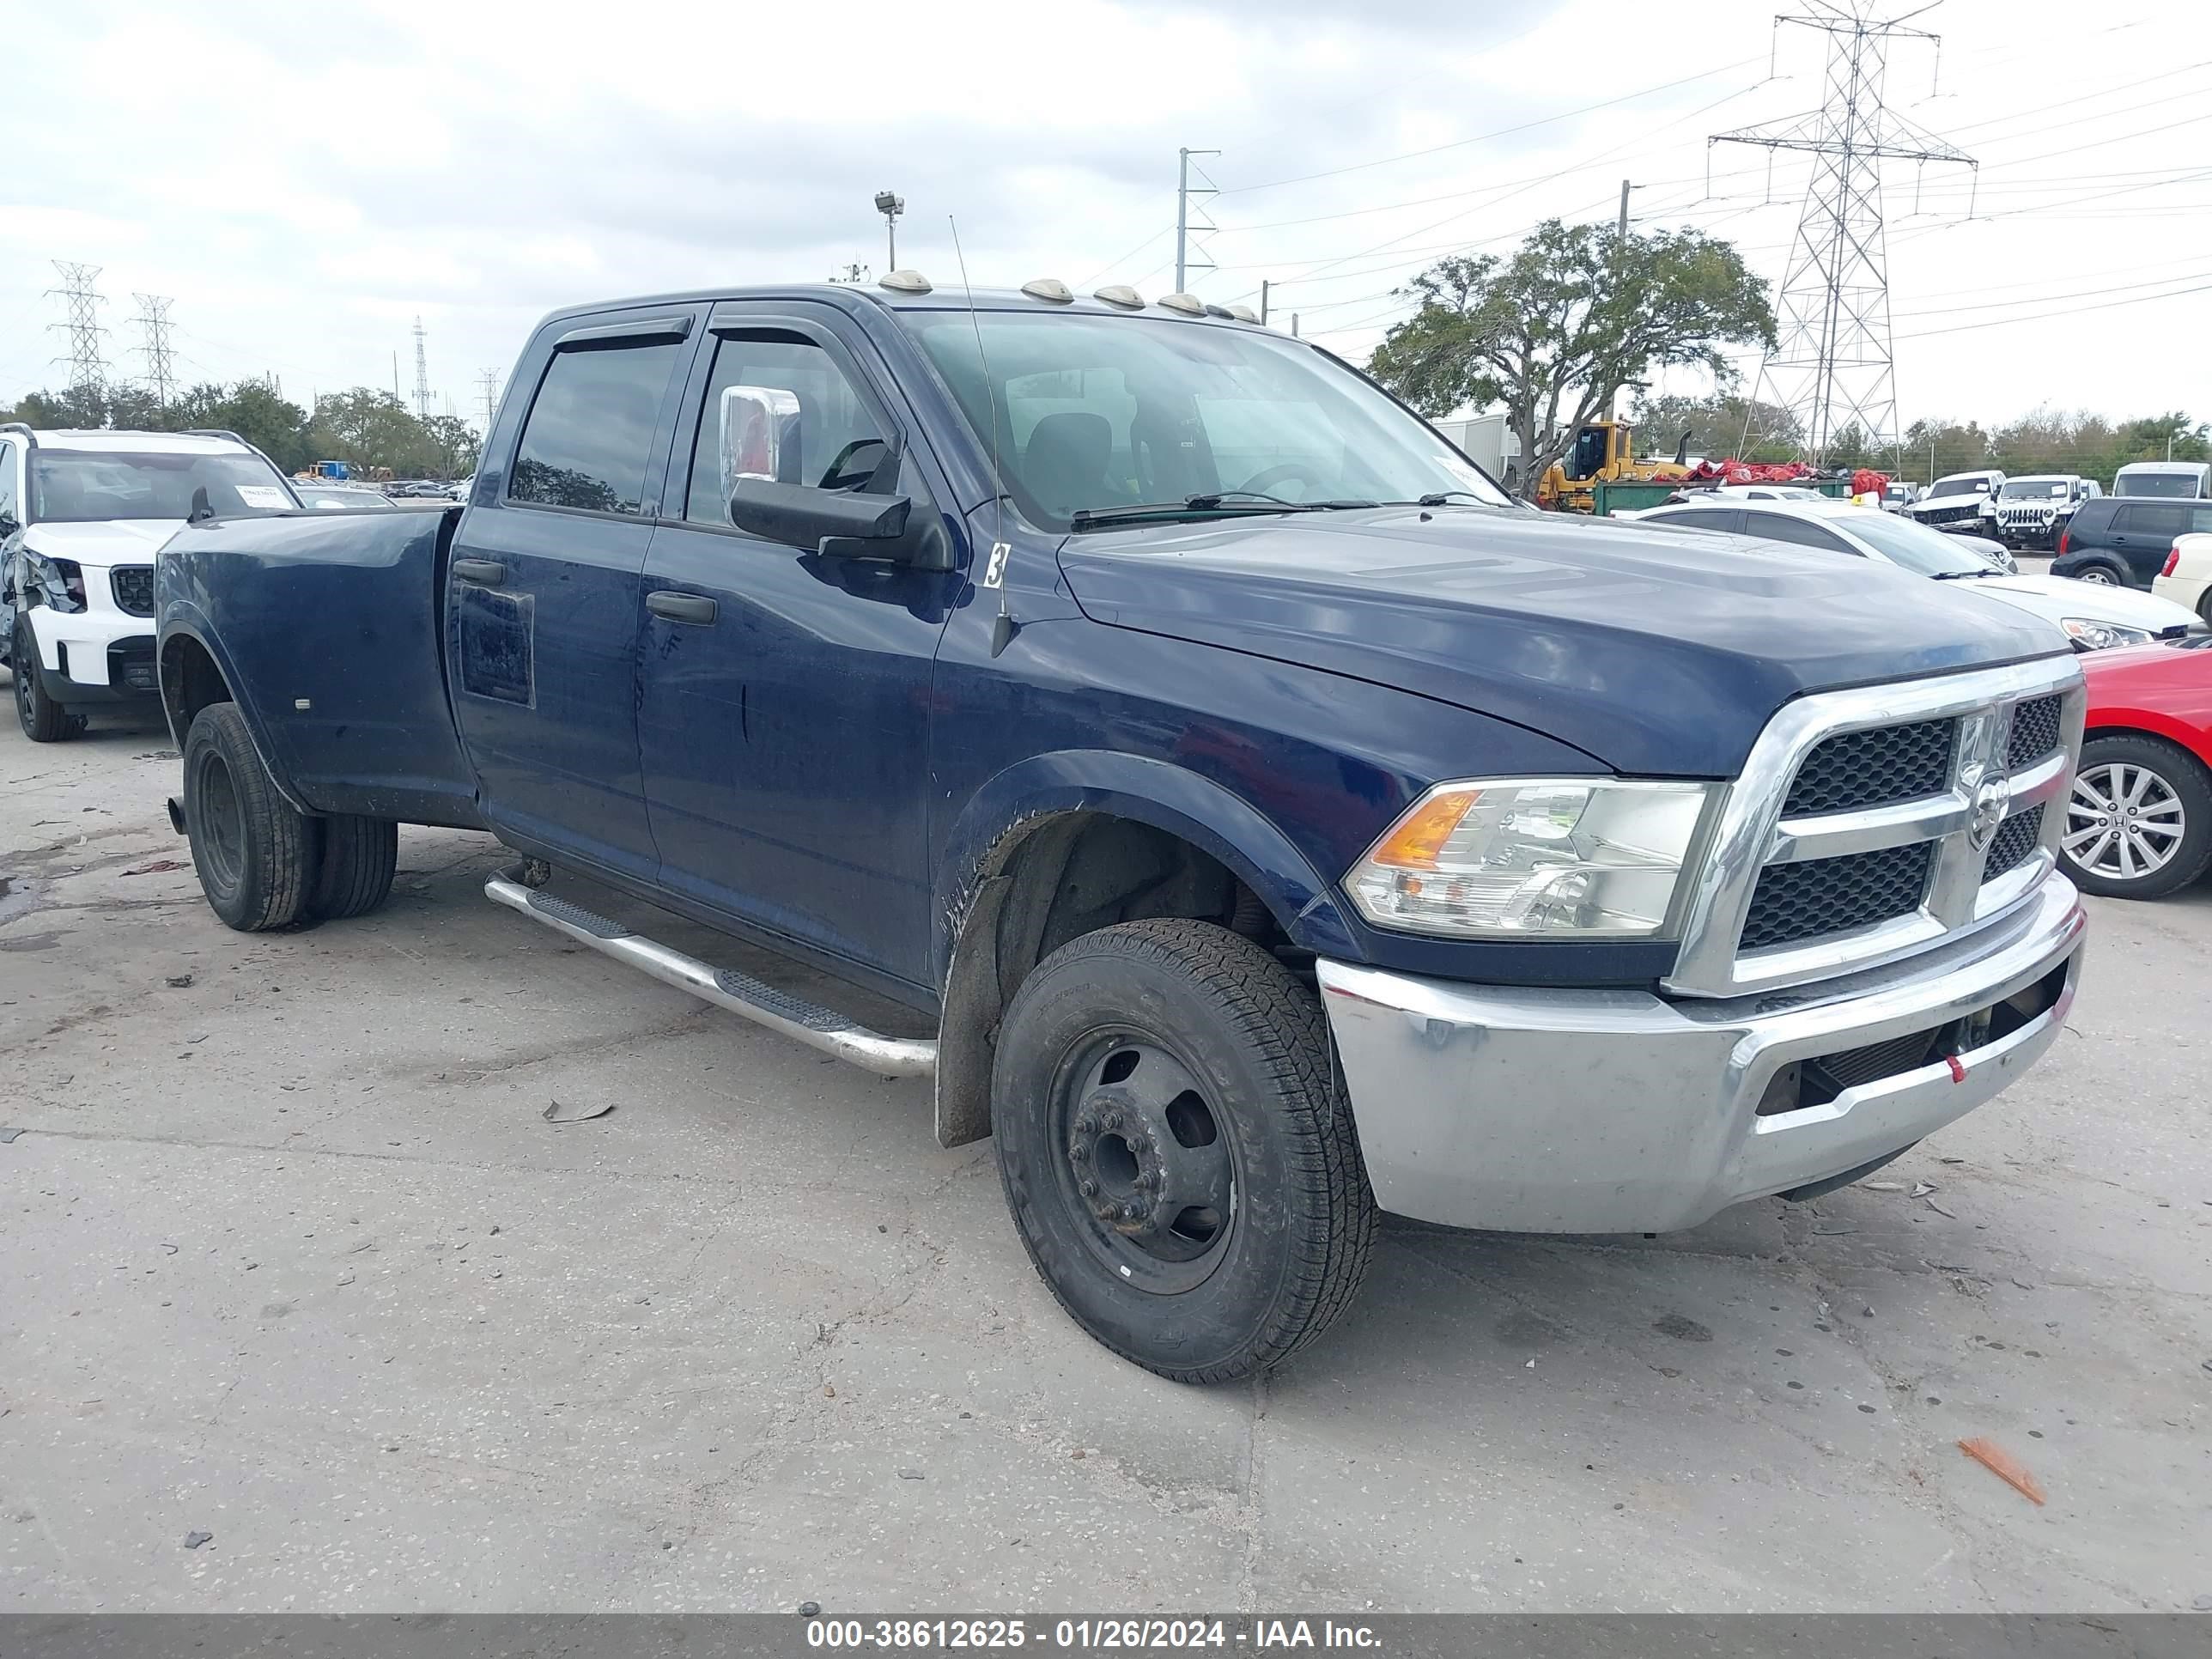 vin: 3C63RRGL8GG143735 3C63RRGL8GG143735 2016 ram 3500 0 for Sale in 33760, 5152 126Th Ave N, Clearwater, USA